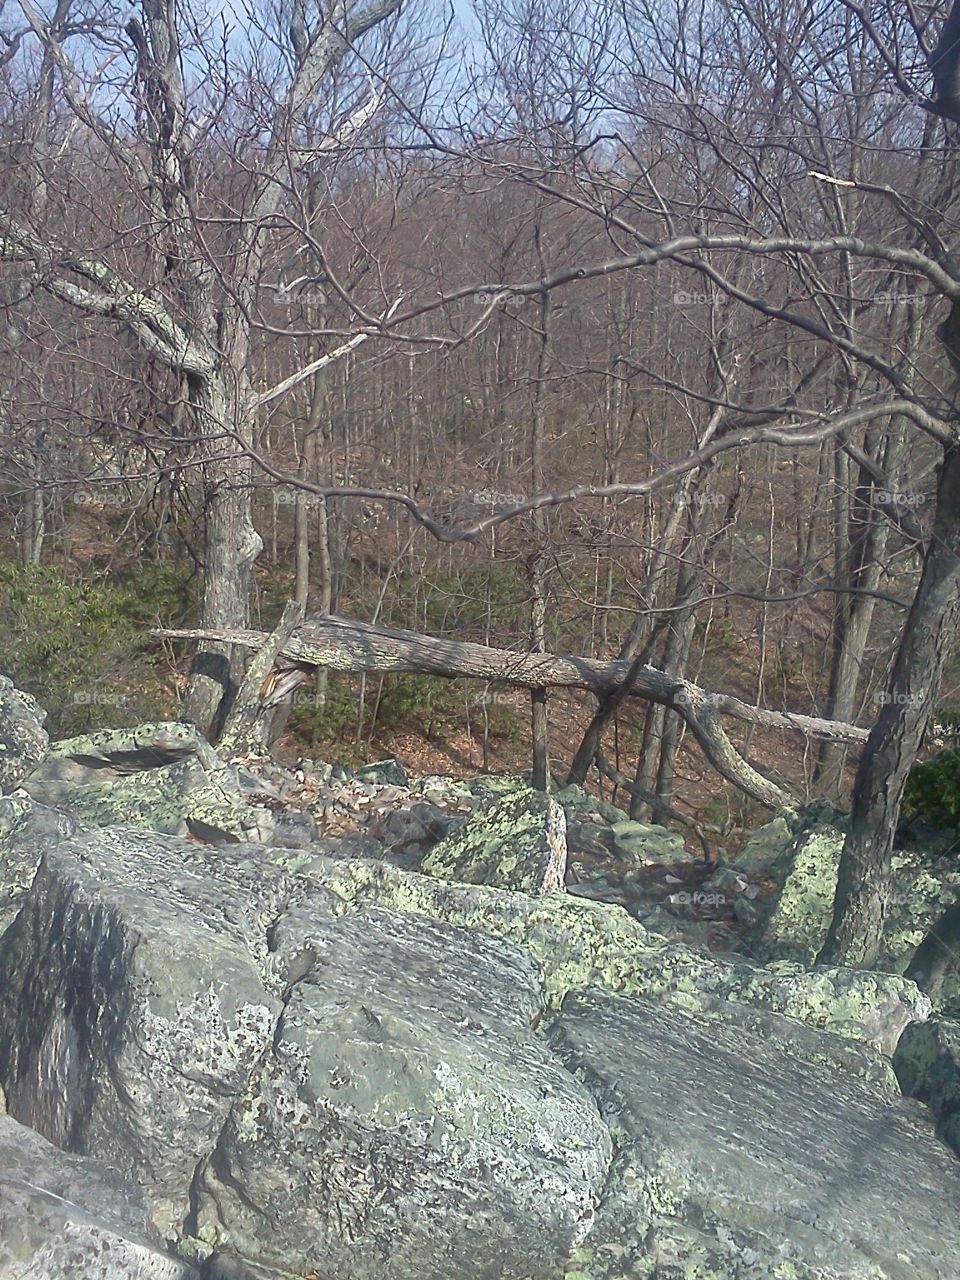 A fallen tree I found while hiking